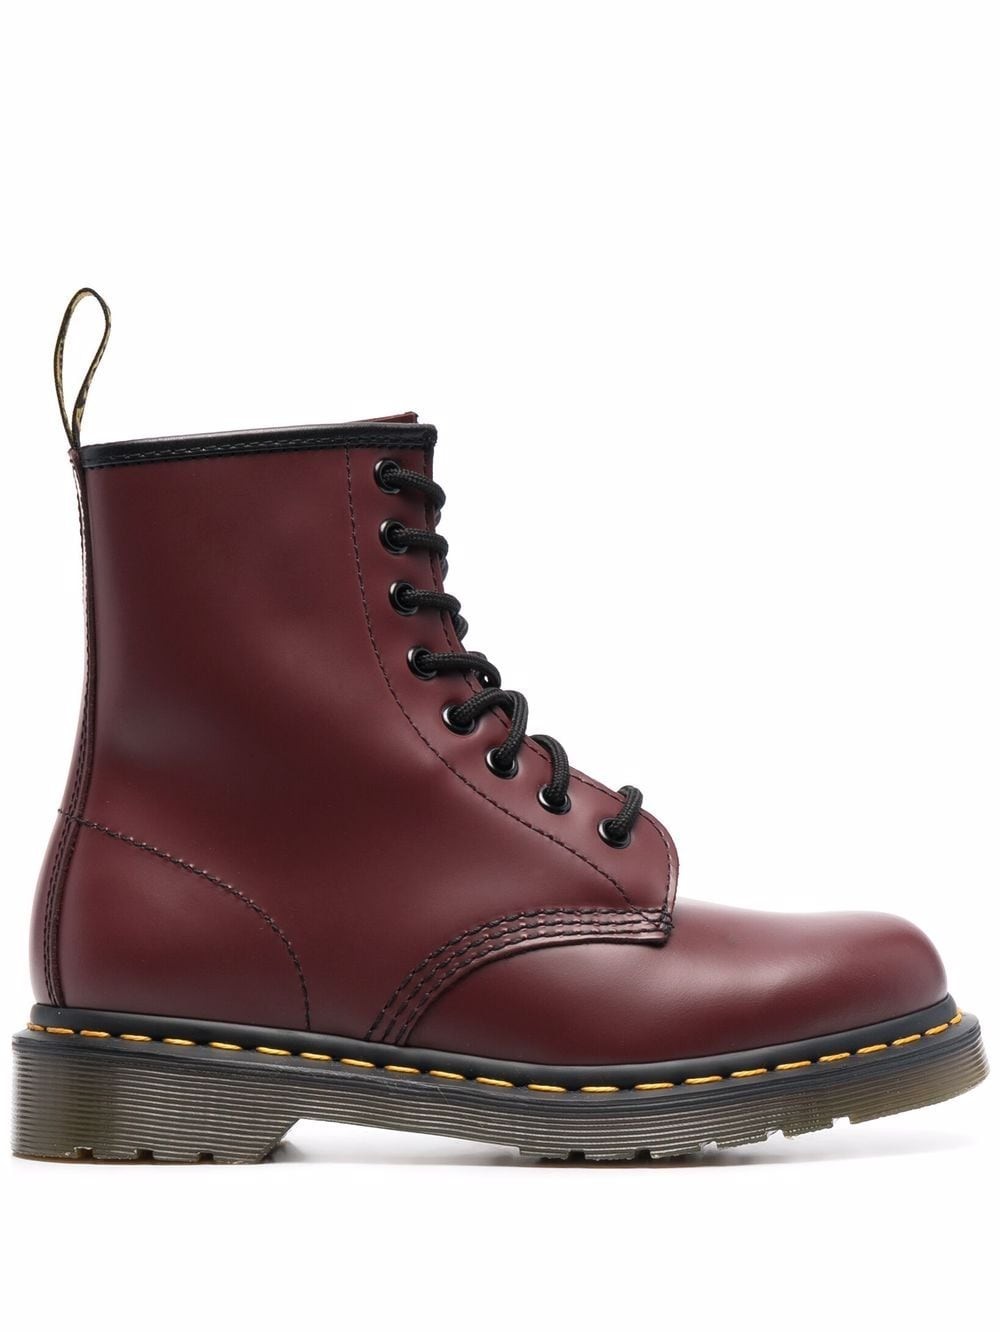 Dr. Martens 1460 CHERRY RED